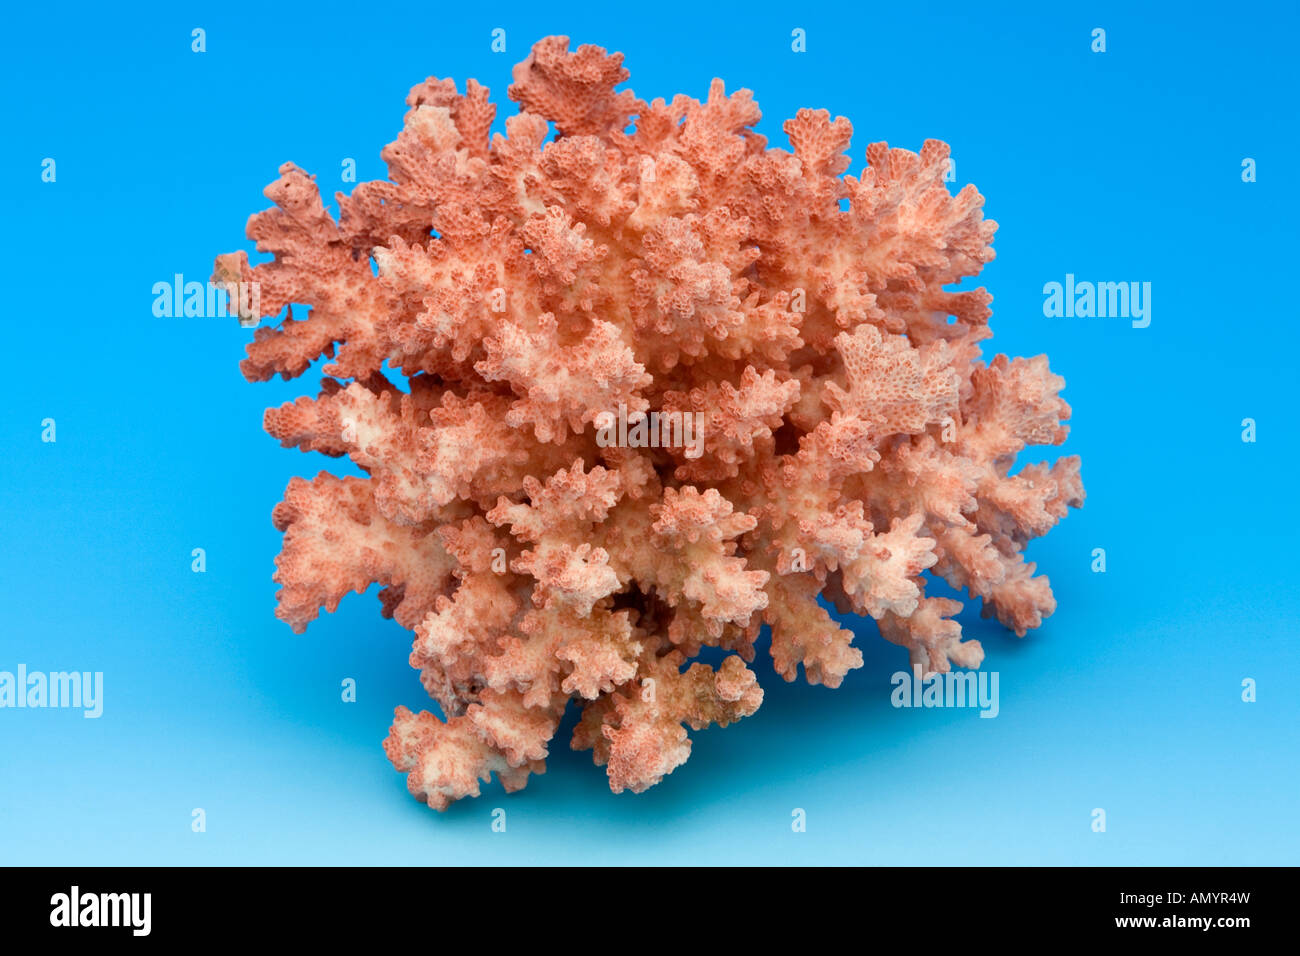 Collected Coral Specimen Stock Photo